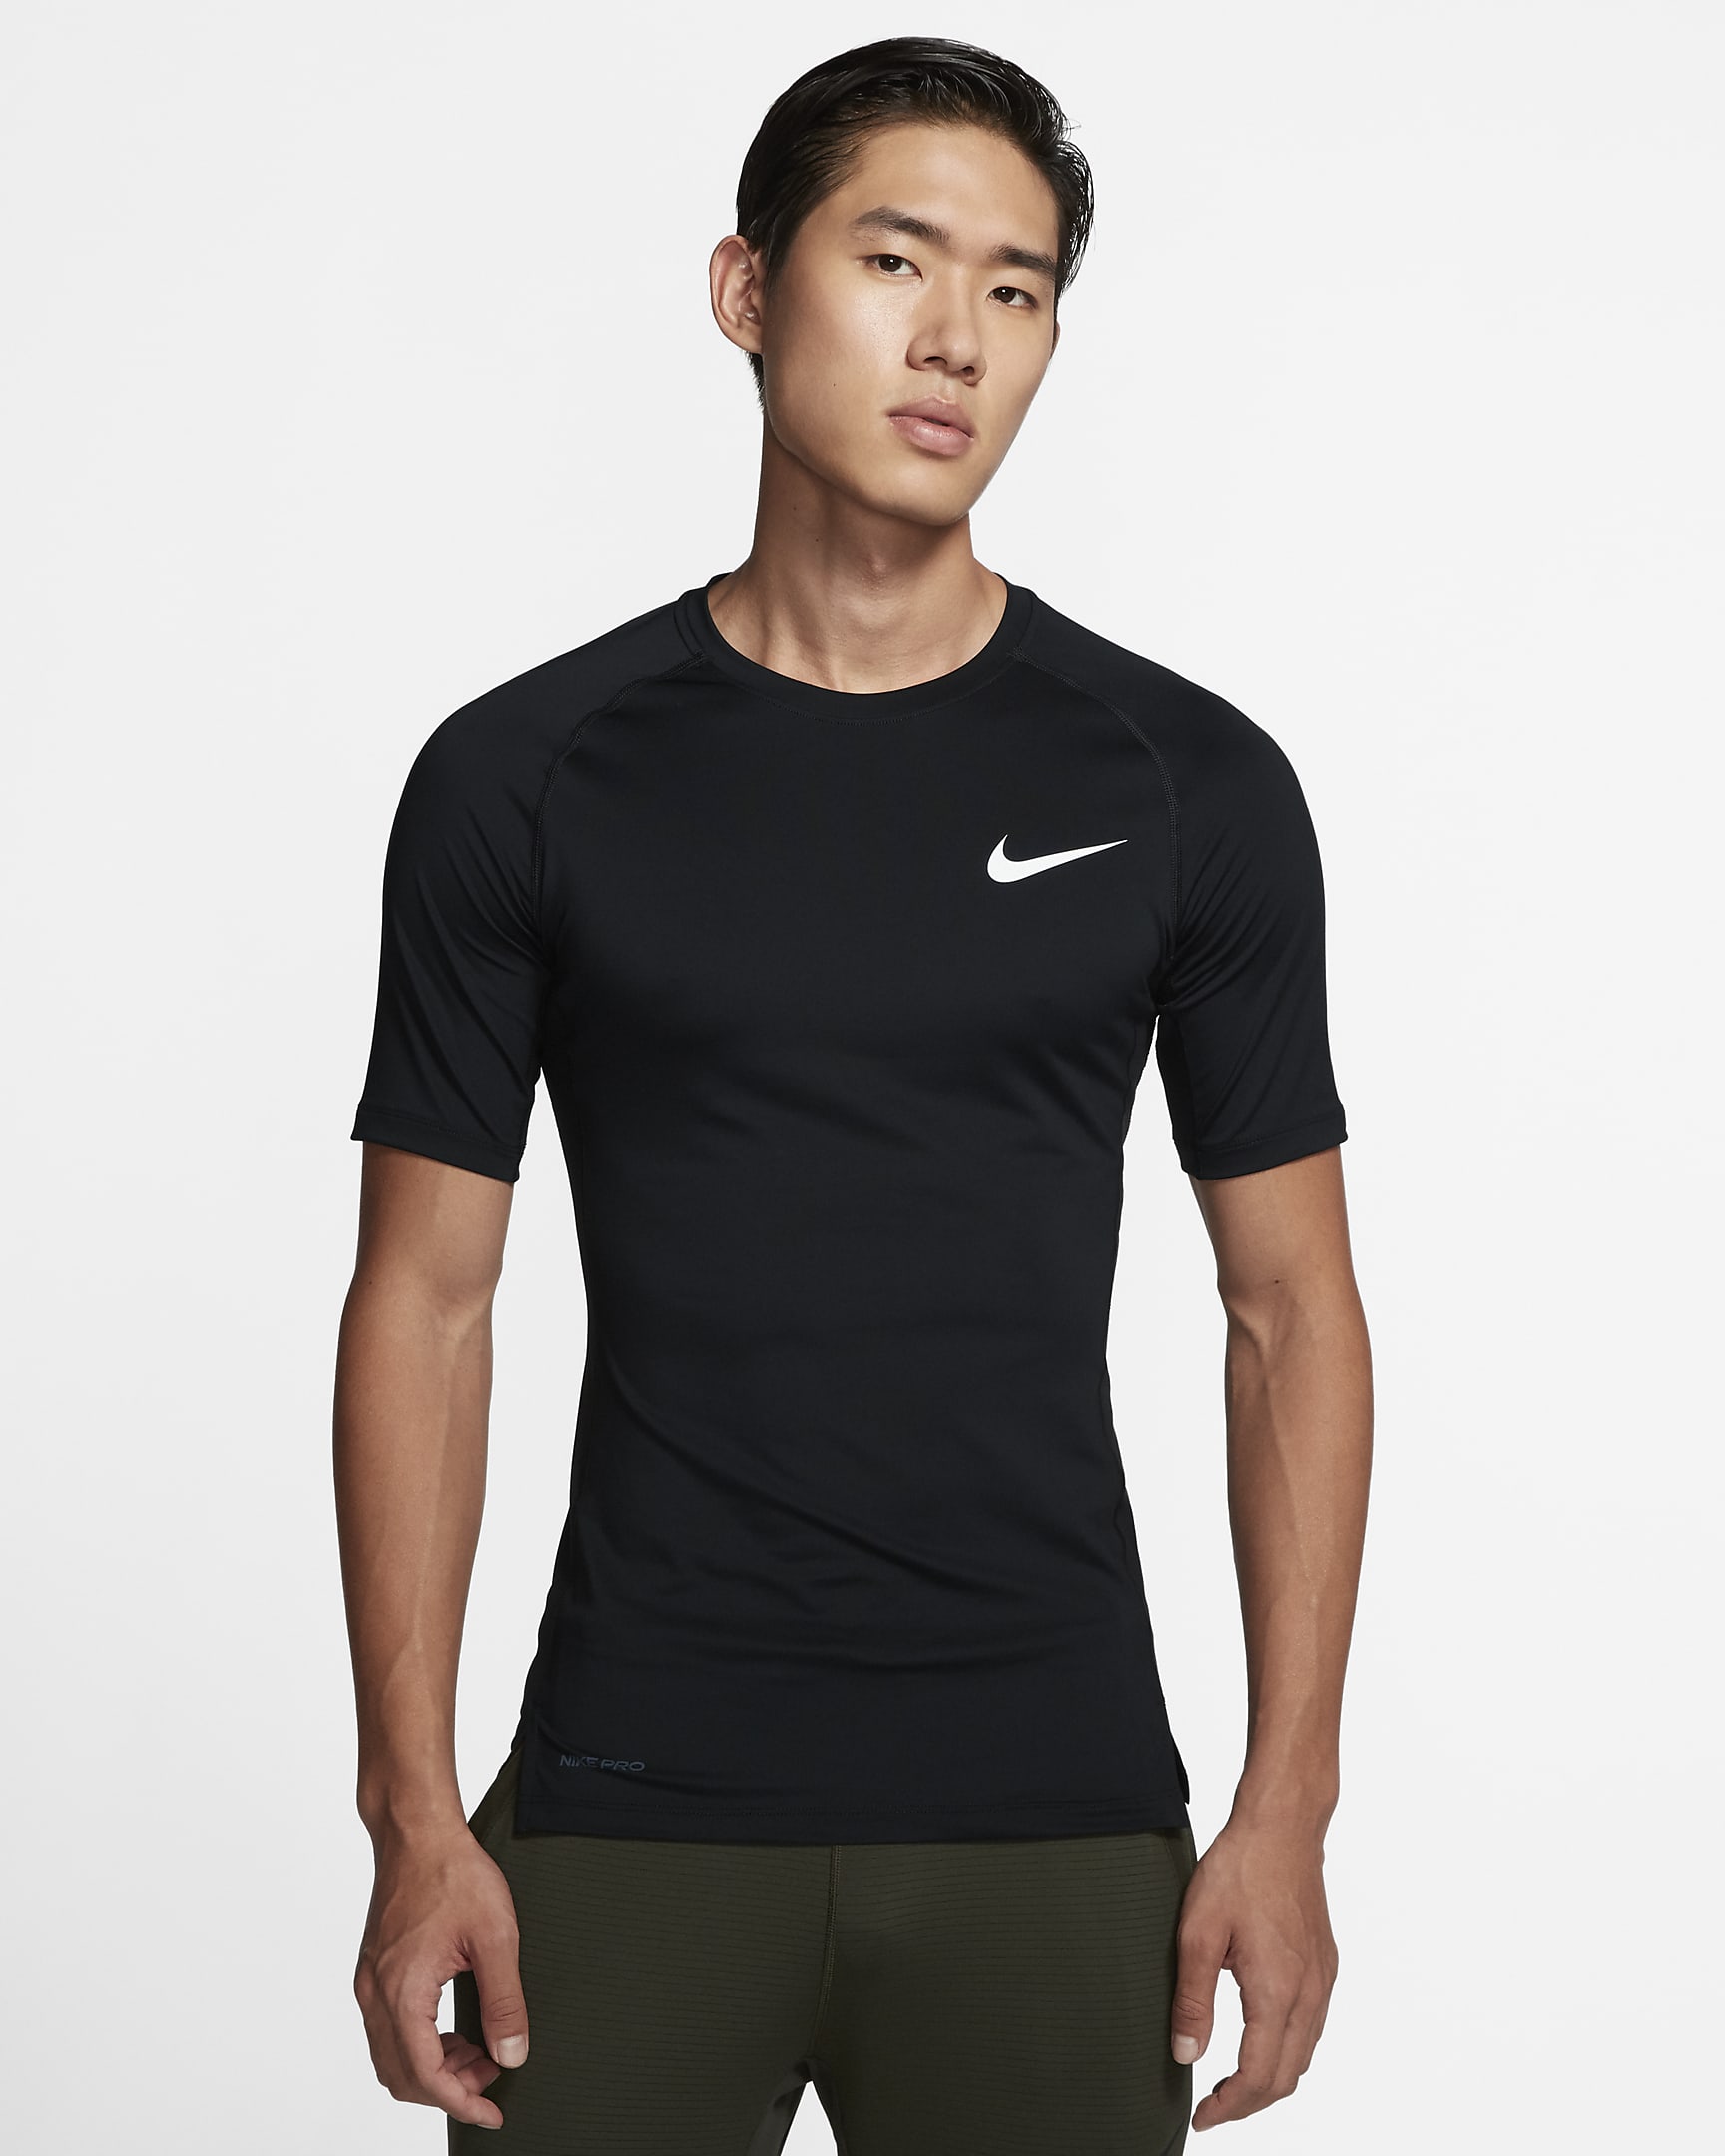 Nike Pro Men's Tight-Fit Short-Sleeve Top. Nike MY